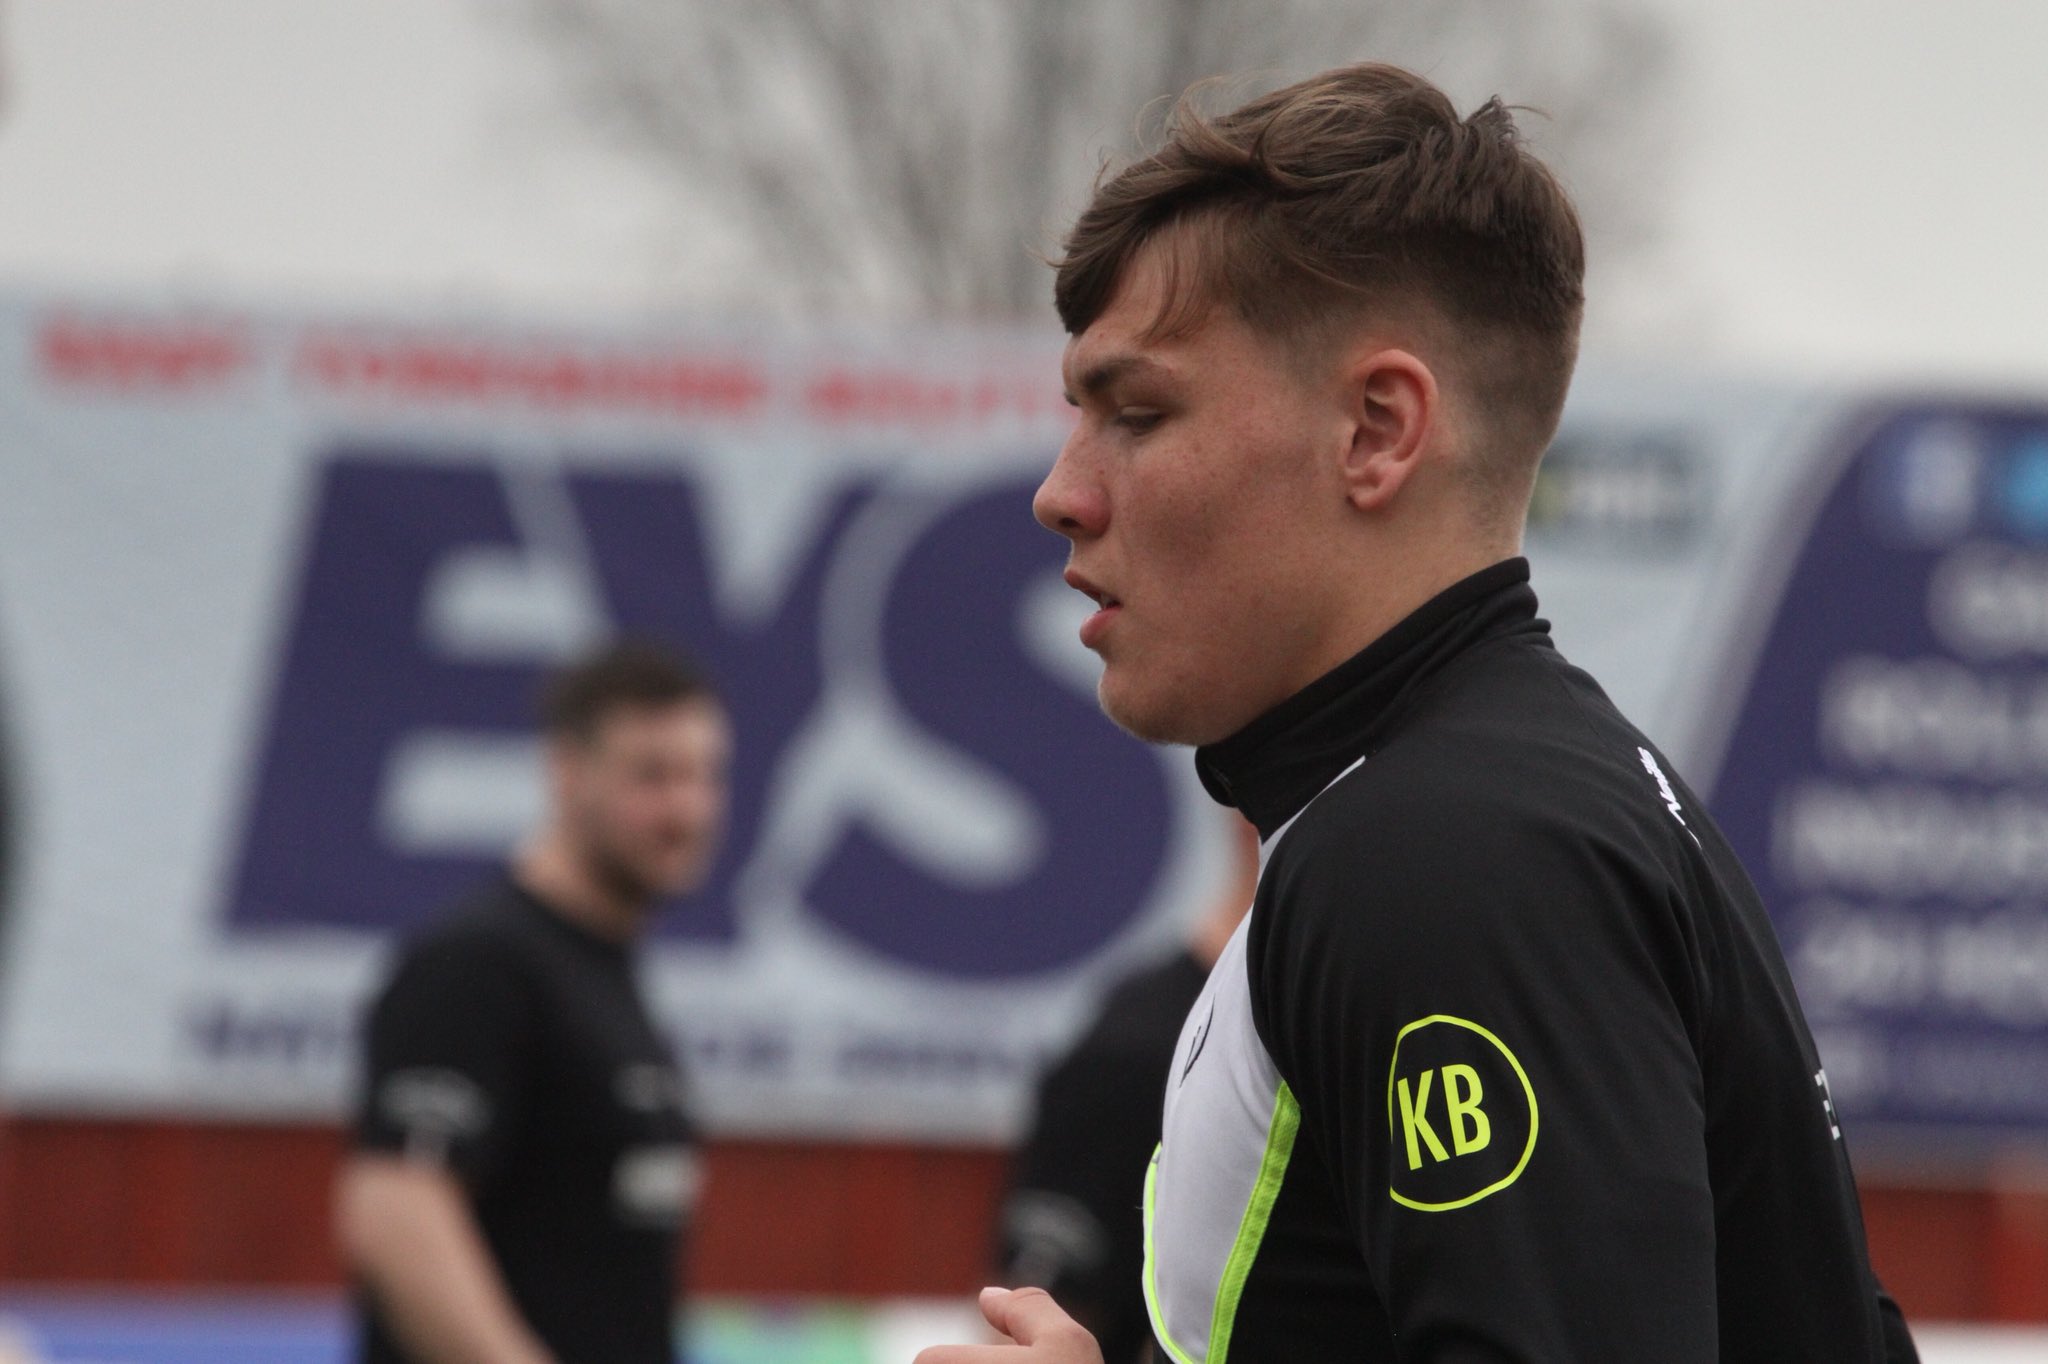 Widnes starlet Keanan Brand to have surgery after double leg break